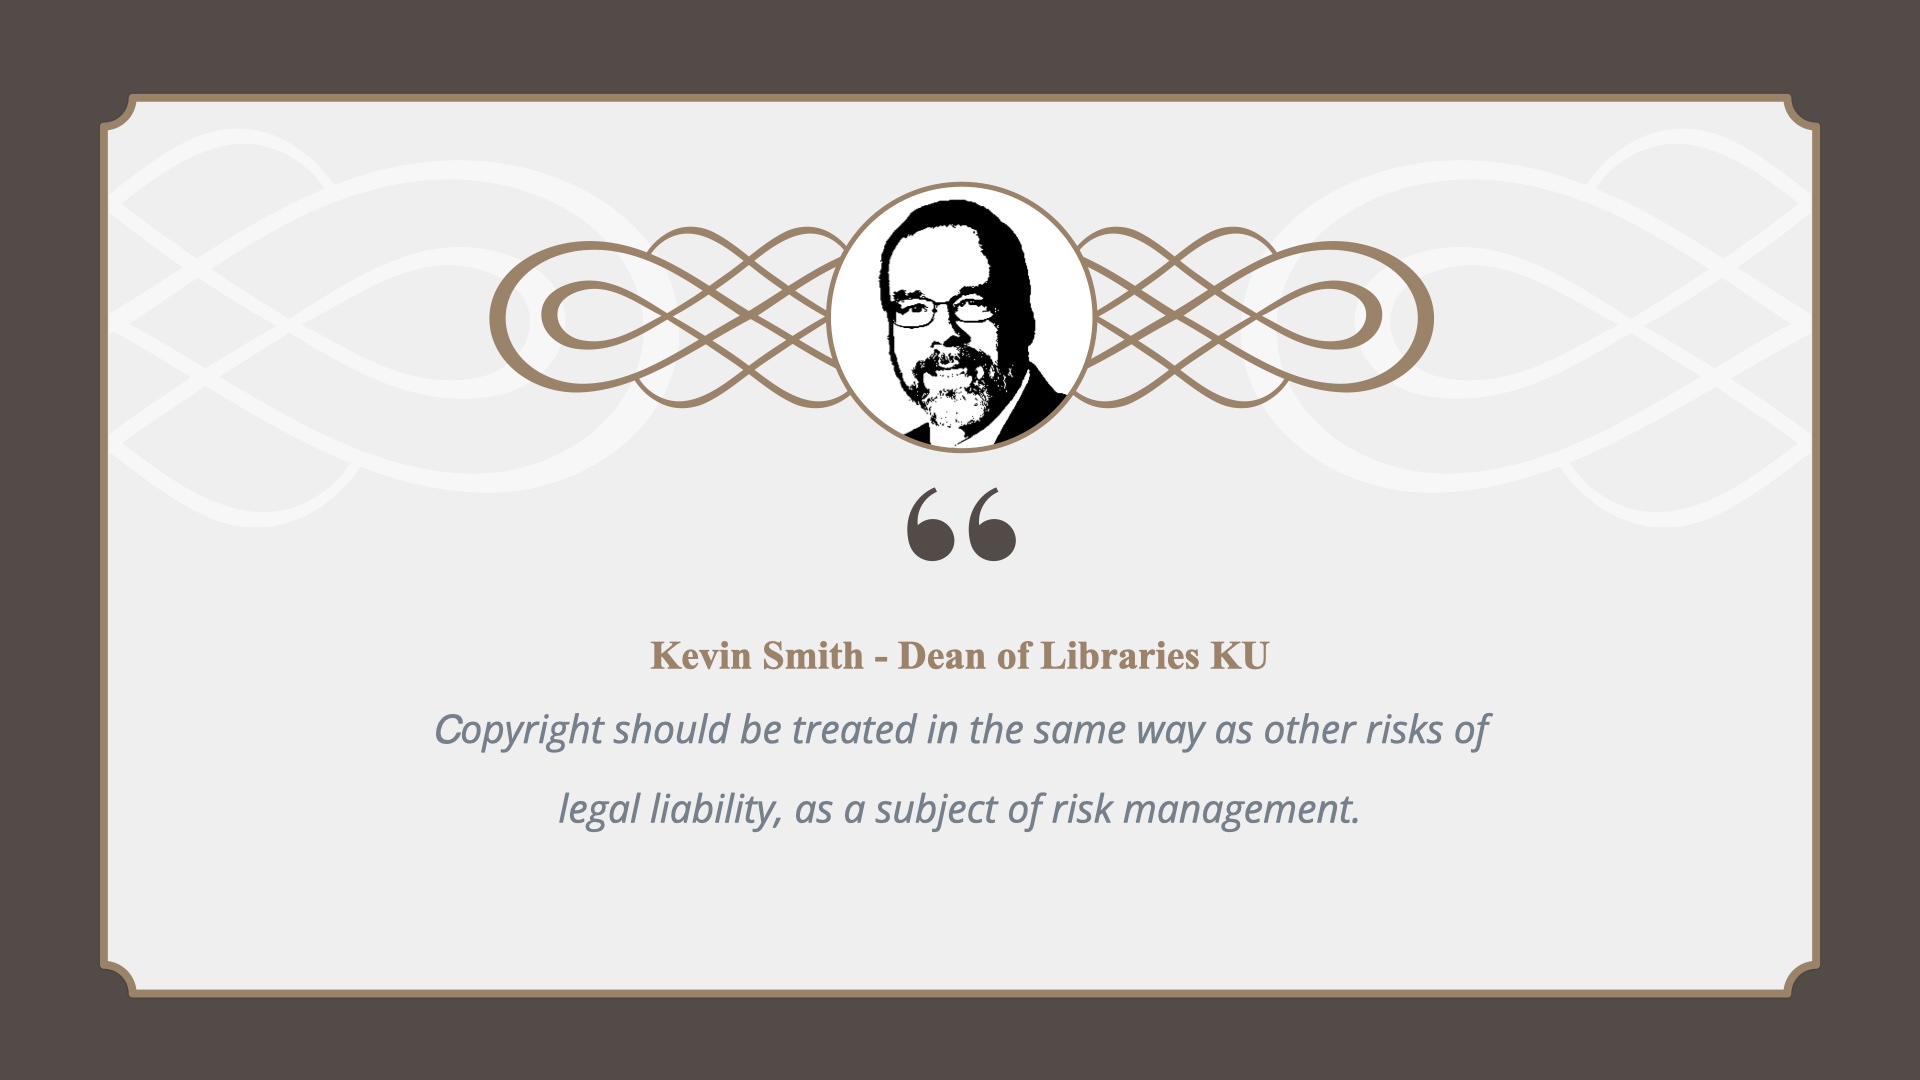 Small headshot of Kevin Smith, Dean of Libraries at KU. Quote: Copyright should be treated in the same way as other risks of legal liability, as a subject of risk management.